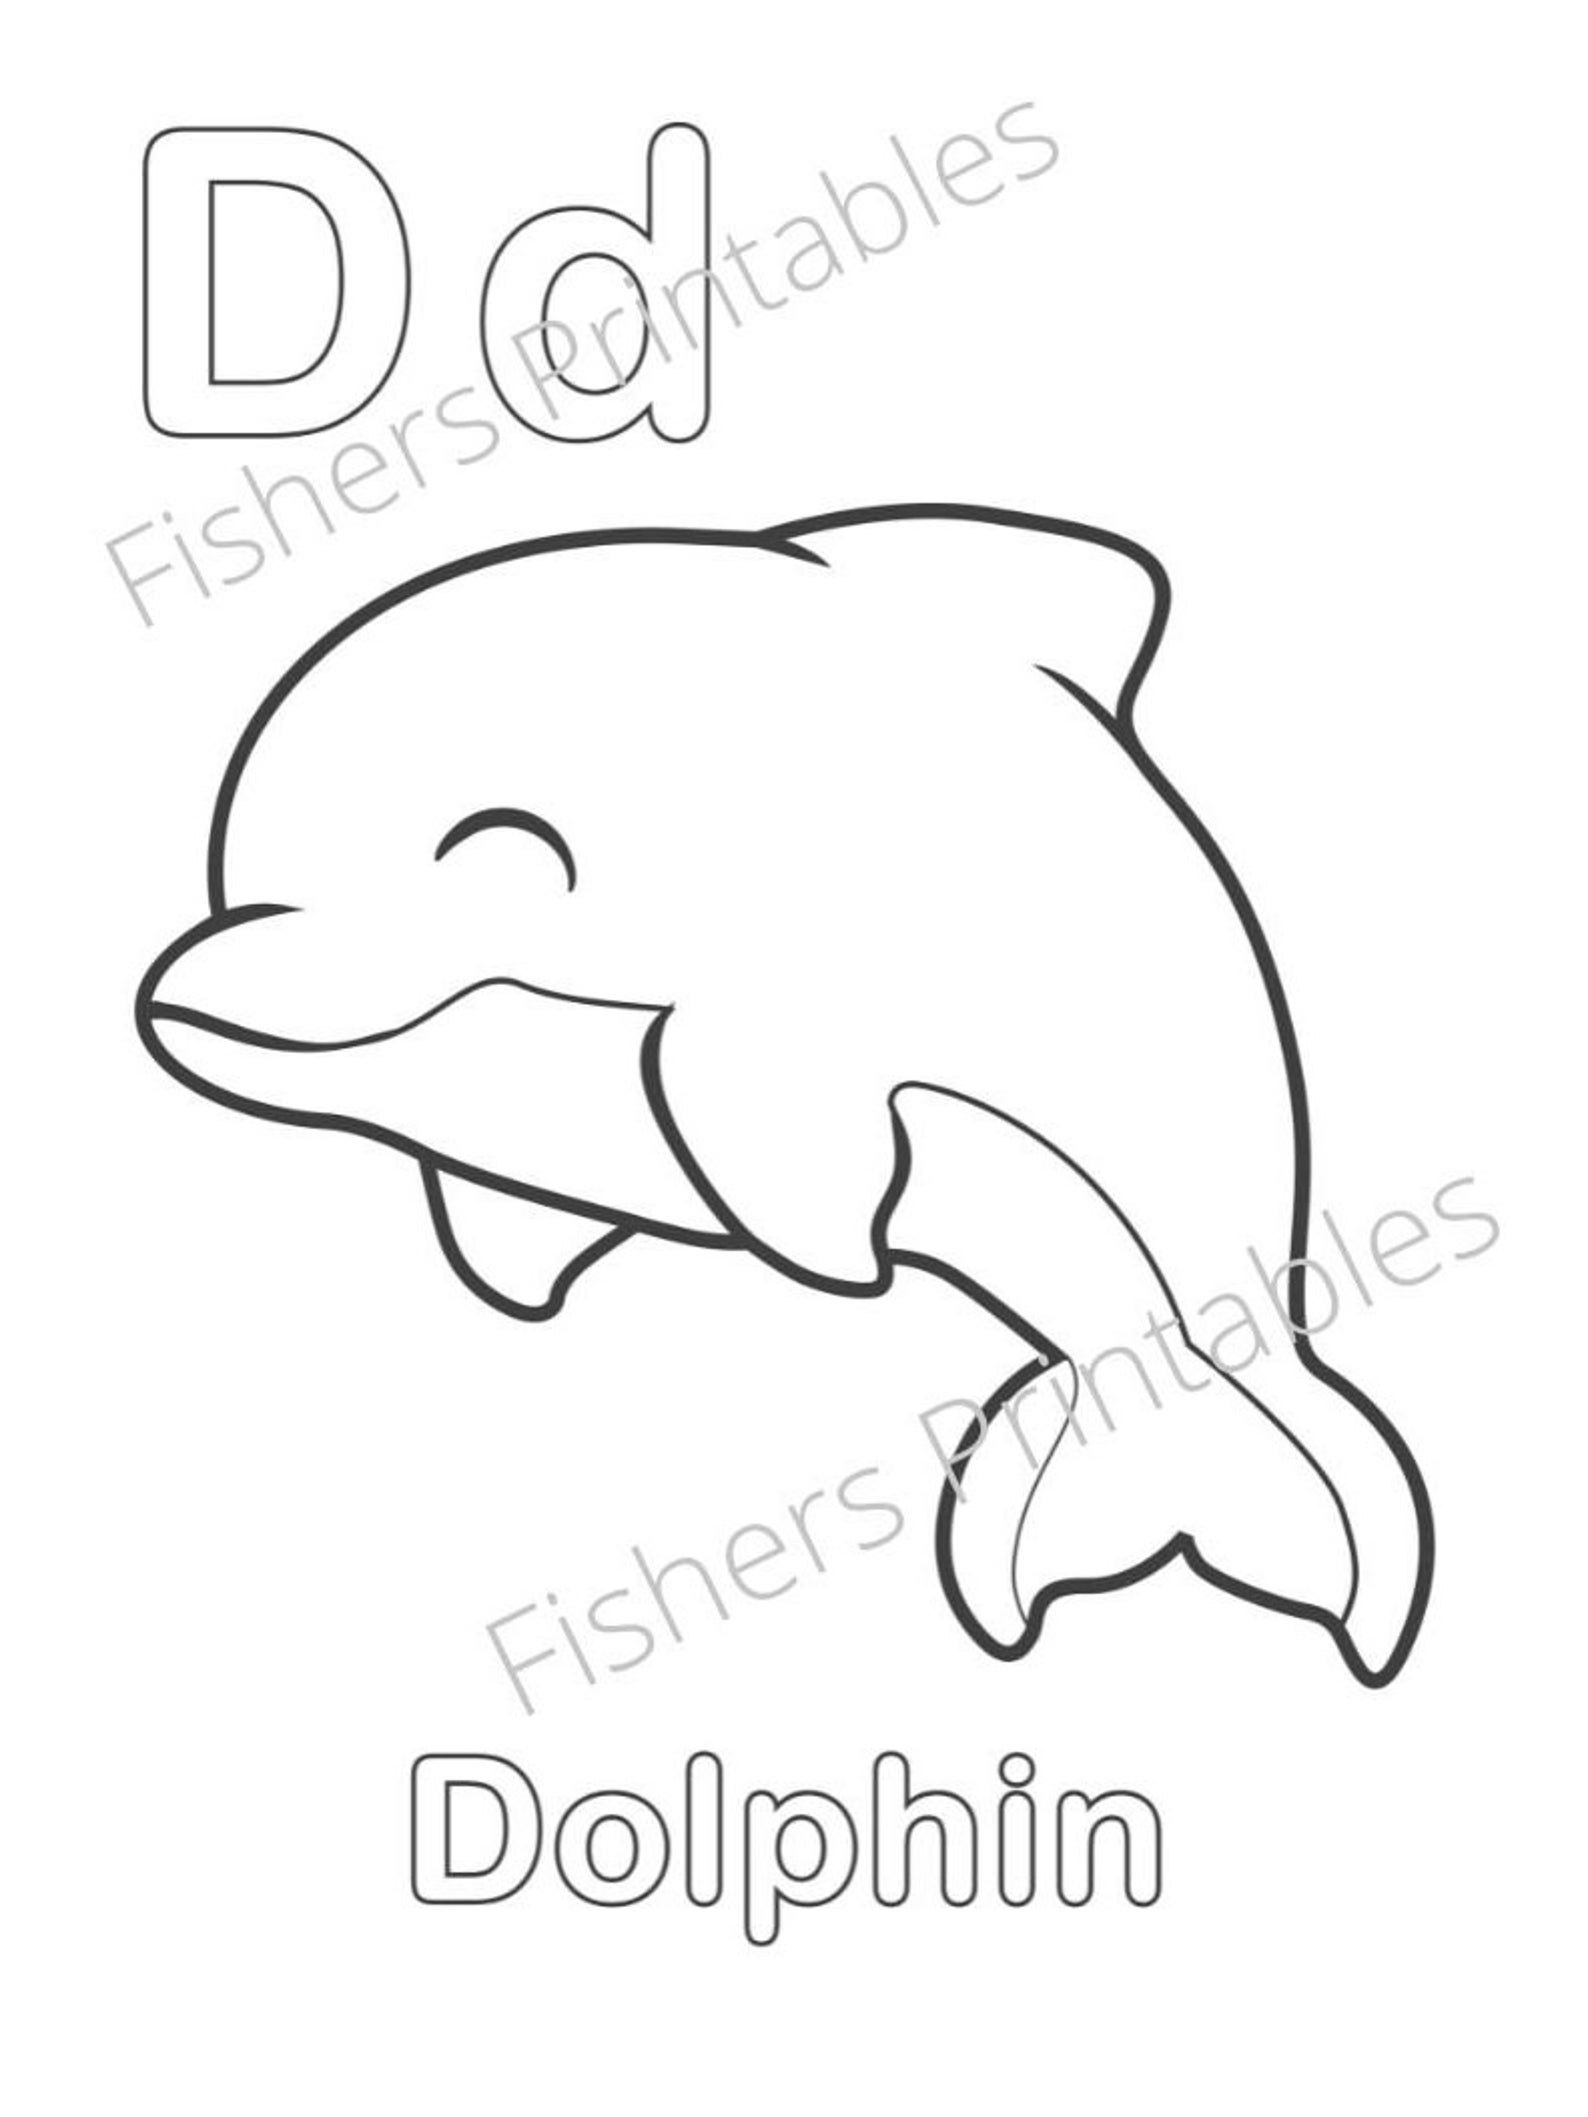 26 Printable Animal Alphabet Coloring Pages for Kids | Etsy